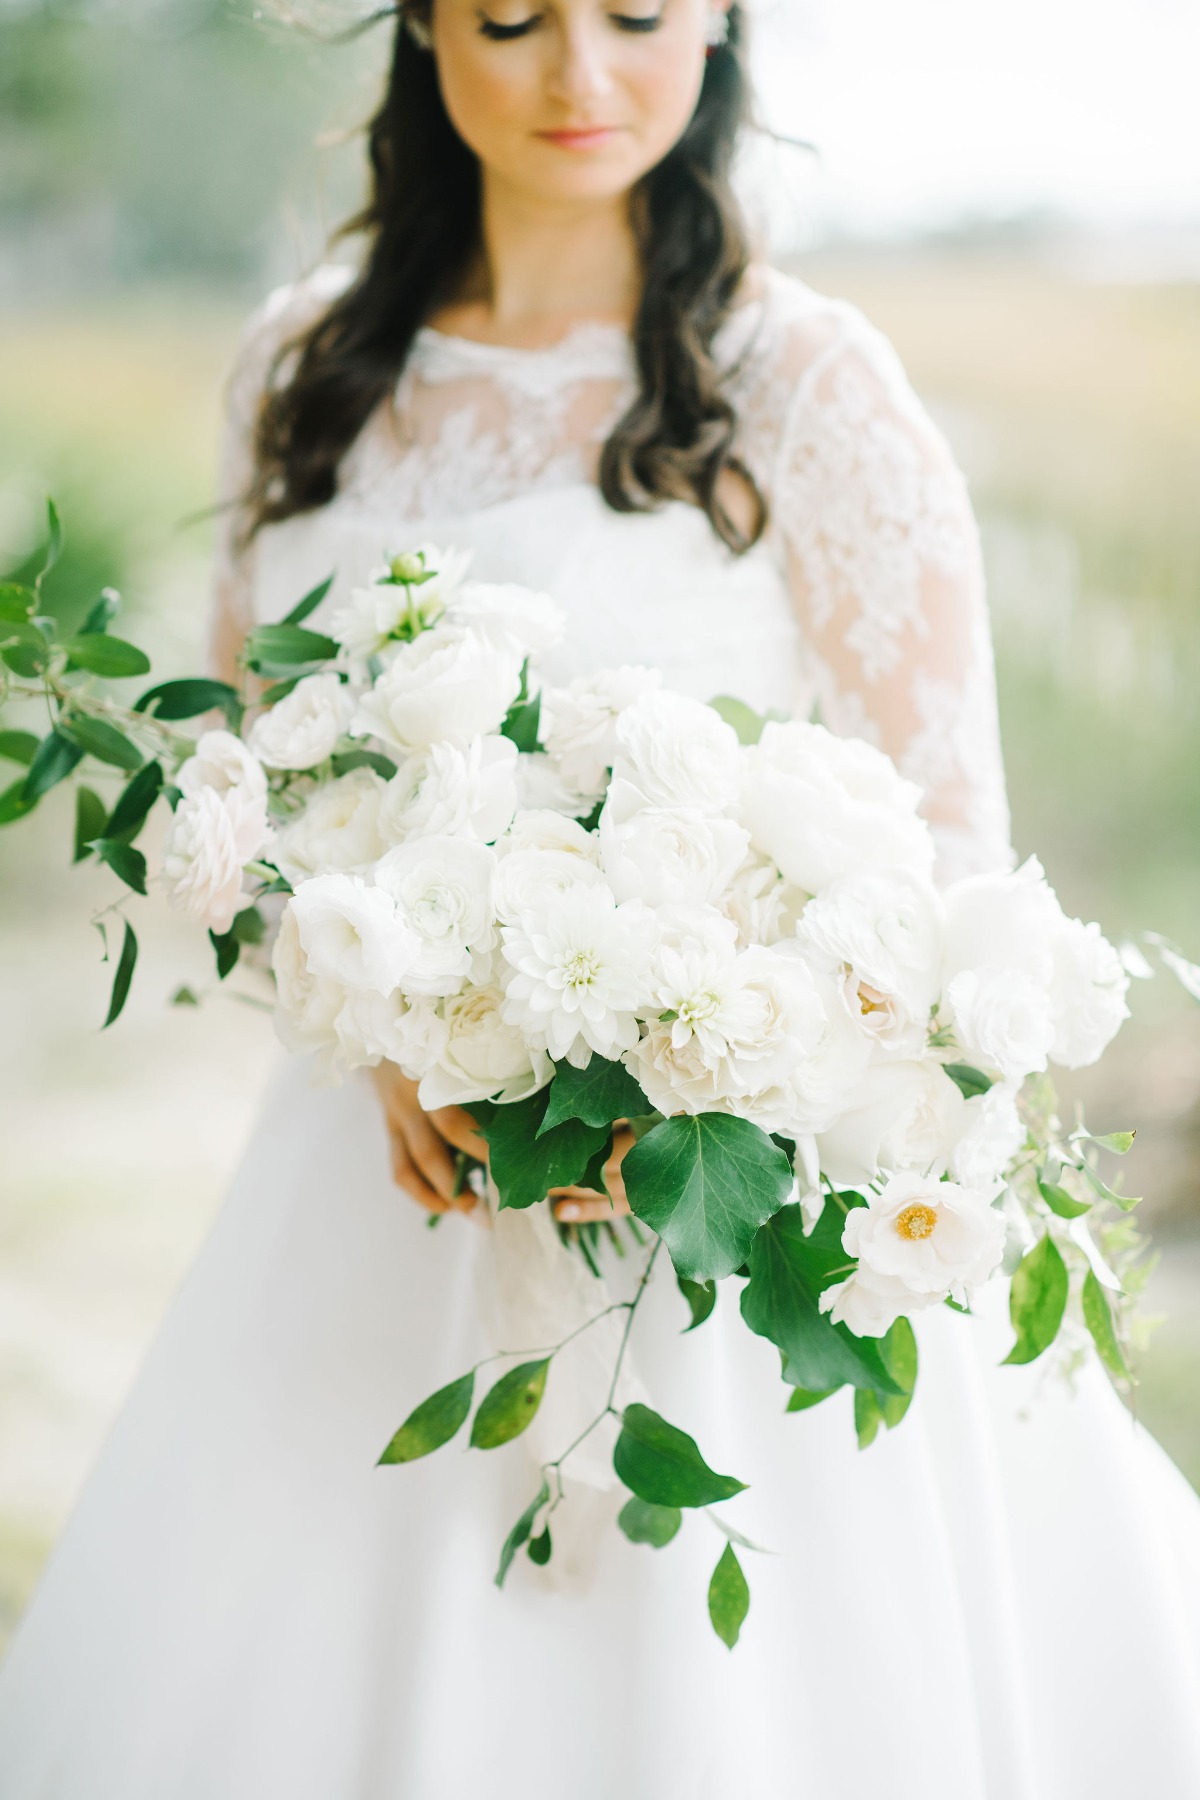 all white wedding bouquet with a small amount of greenery designed by Petaloso